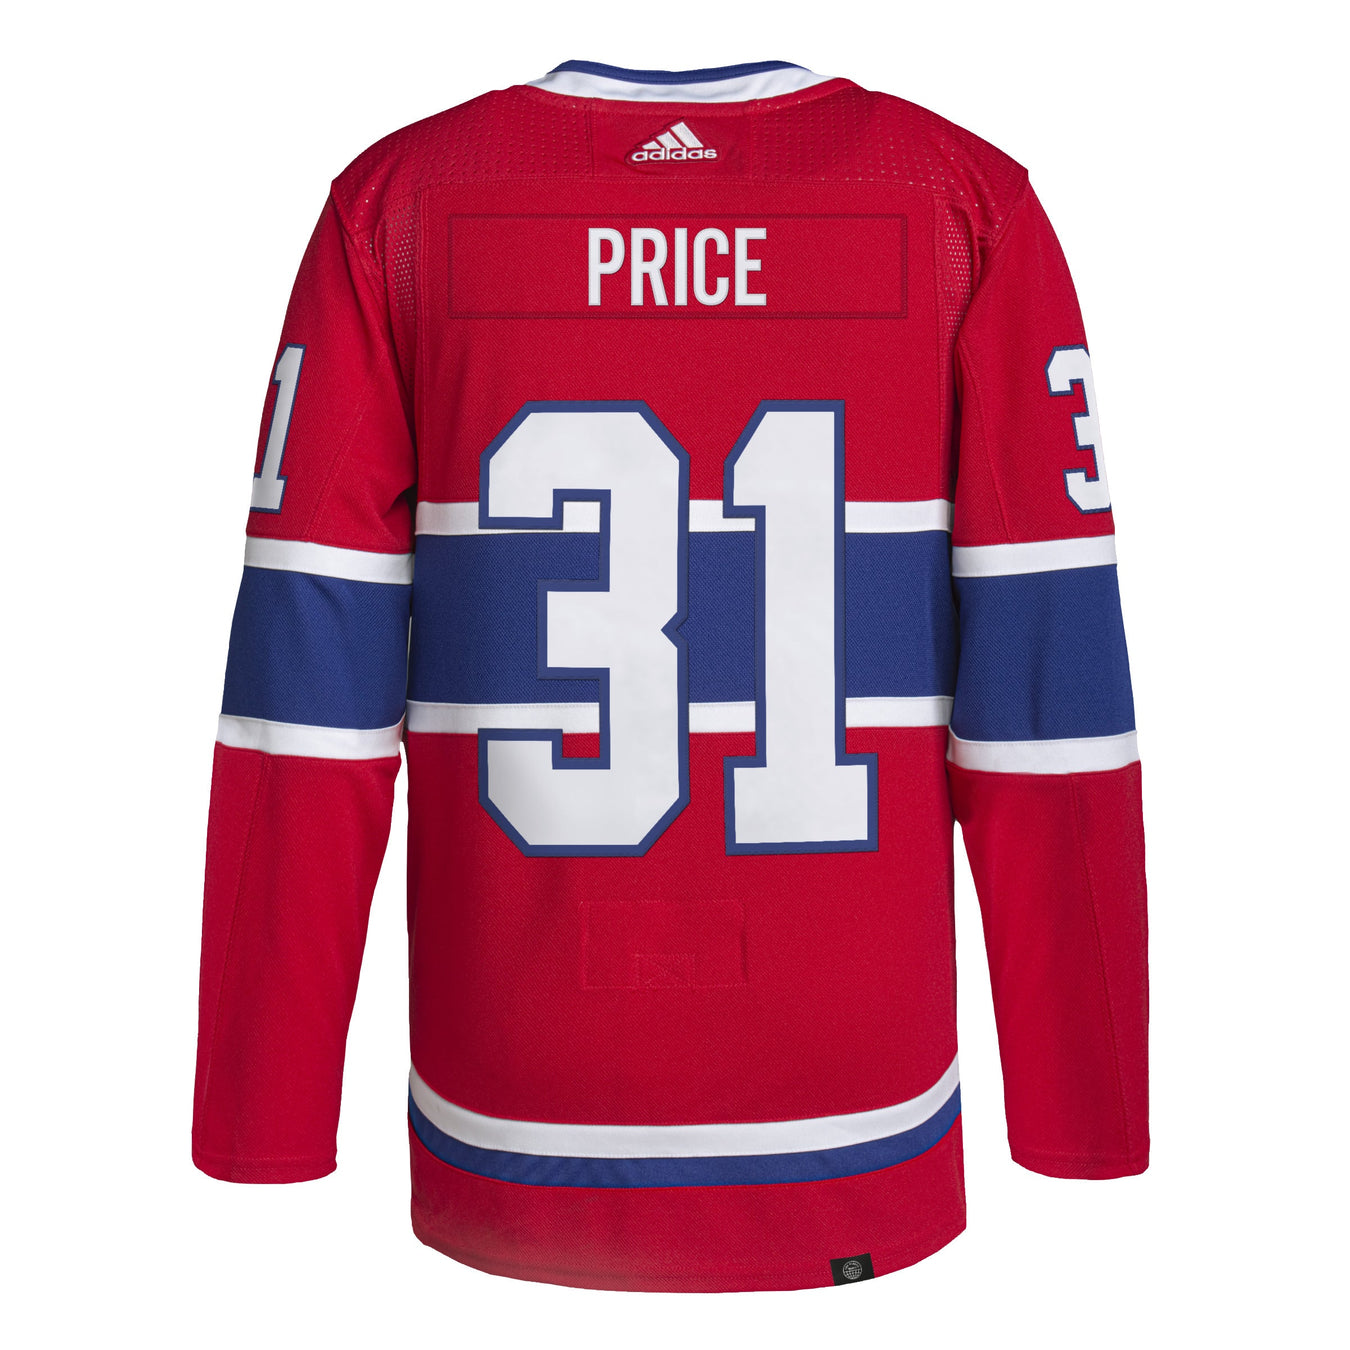 Carey Price NHL Jerseys, Apparel and Collectibles